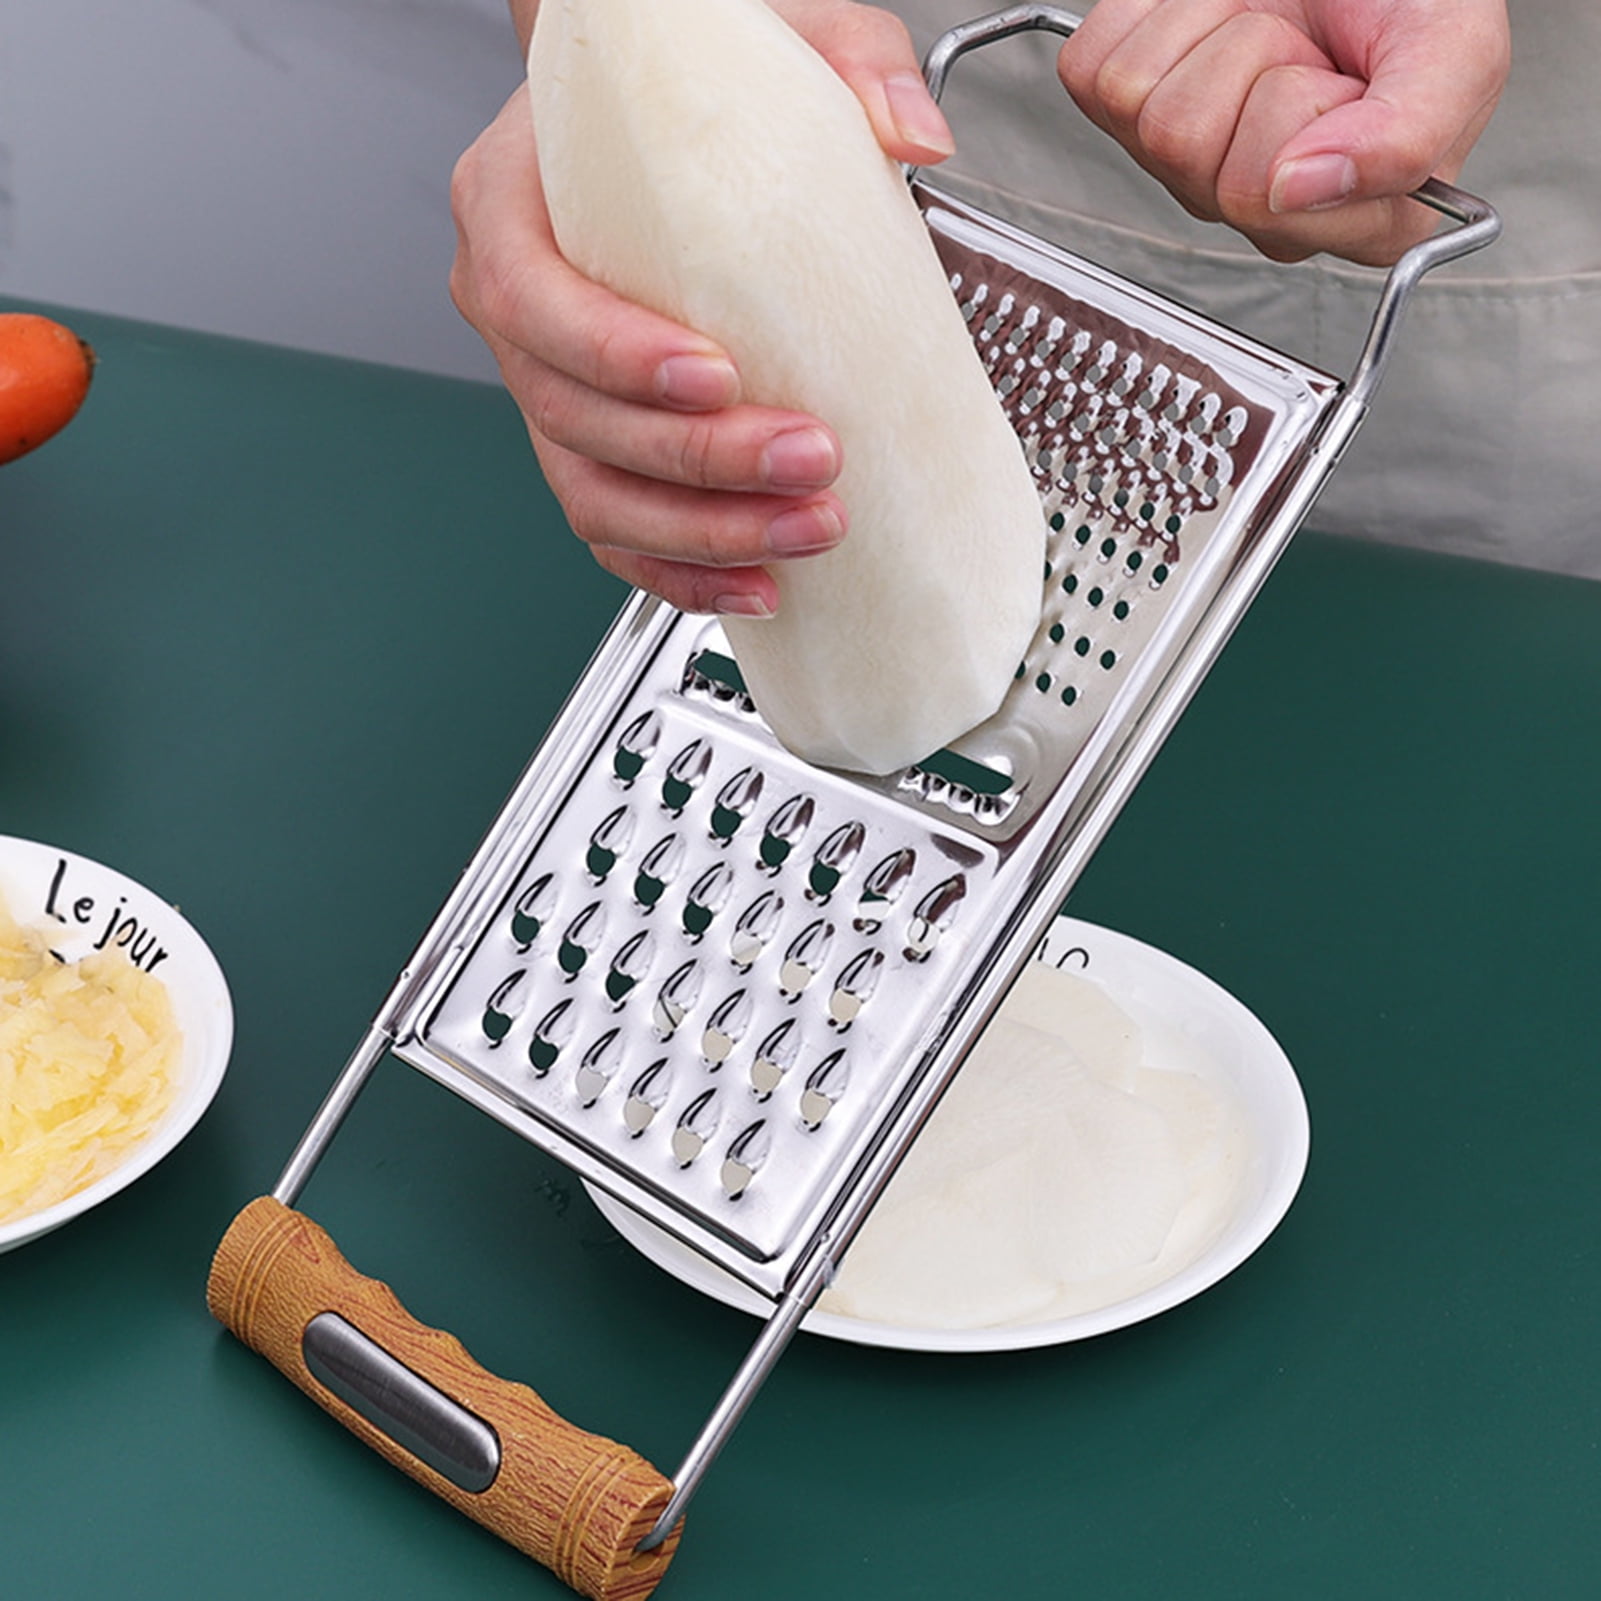 Easychop 6 In 1 Vegetable Chopper Slicer, Efficient Handheld Kitchen Tool  For Onion, Cucumber, Potato And More. From Sunshine_mall, $5.88